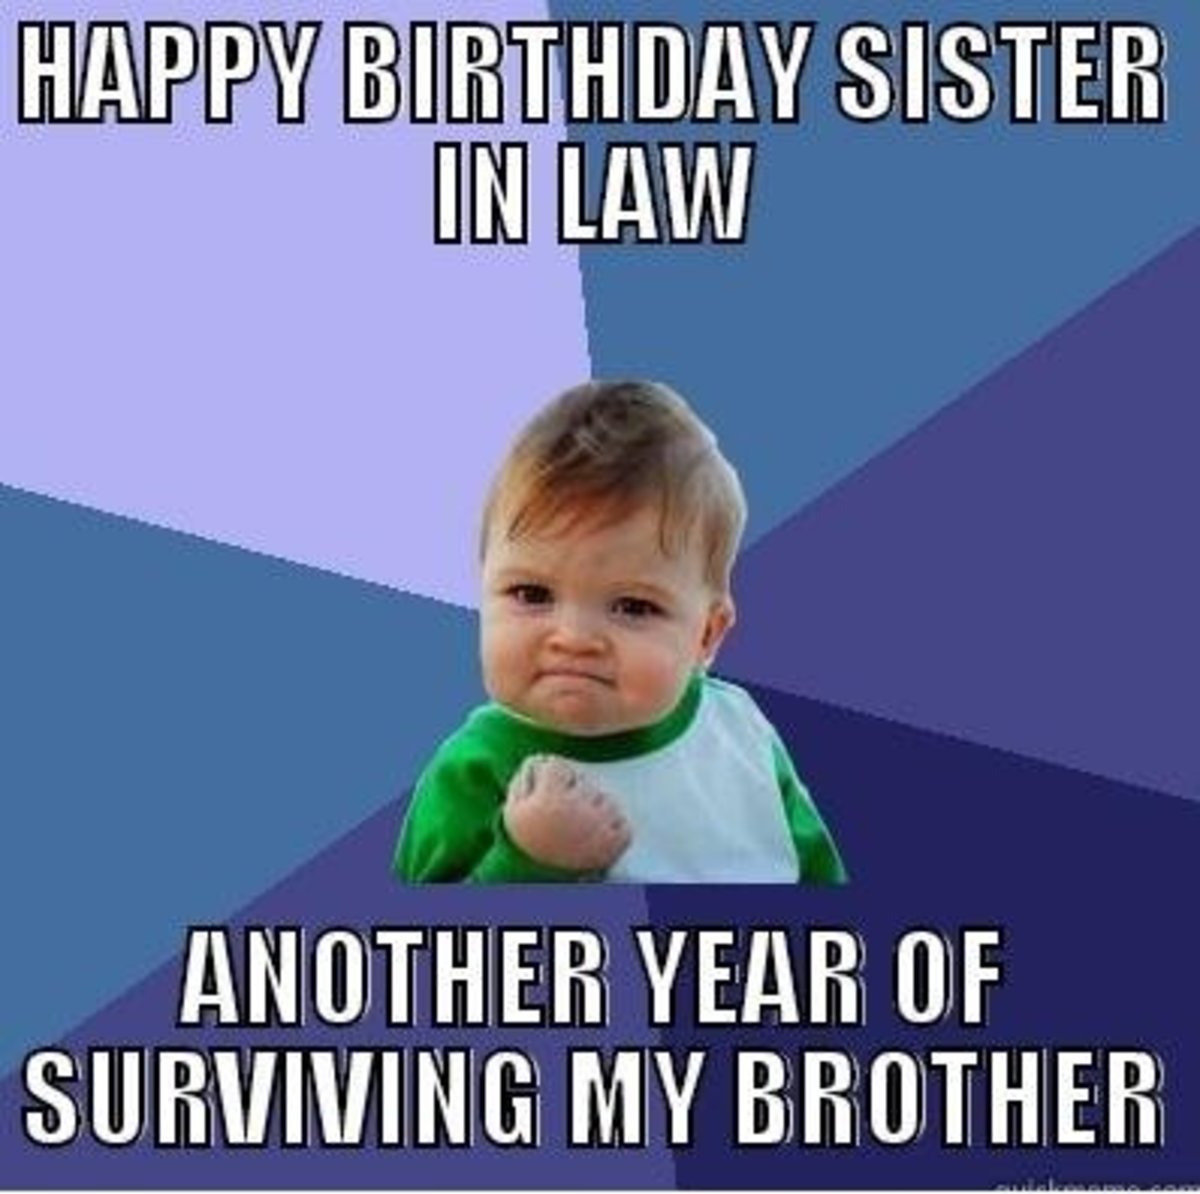 Happy Birthday Sister in Law Quotes and Meme h